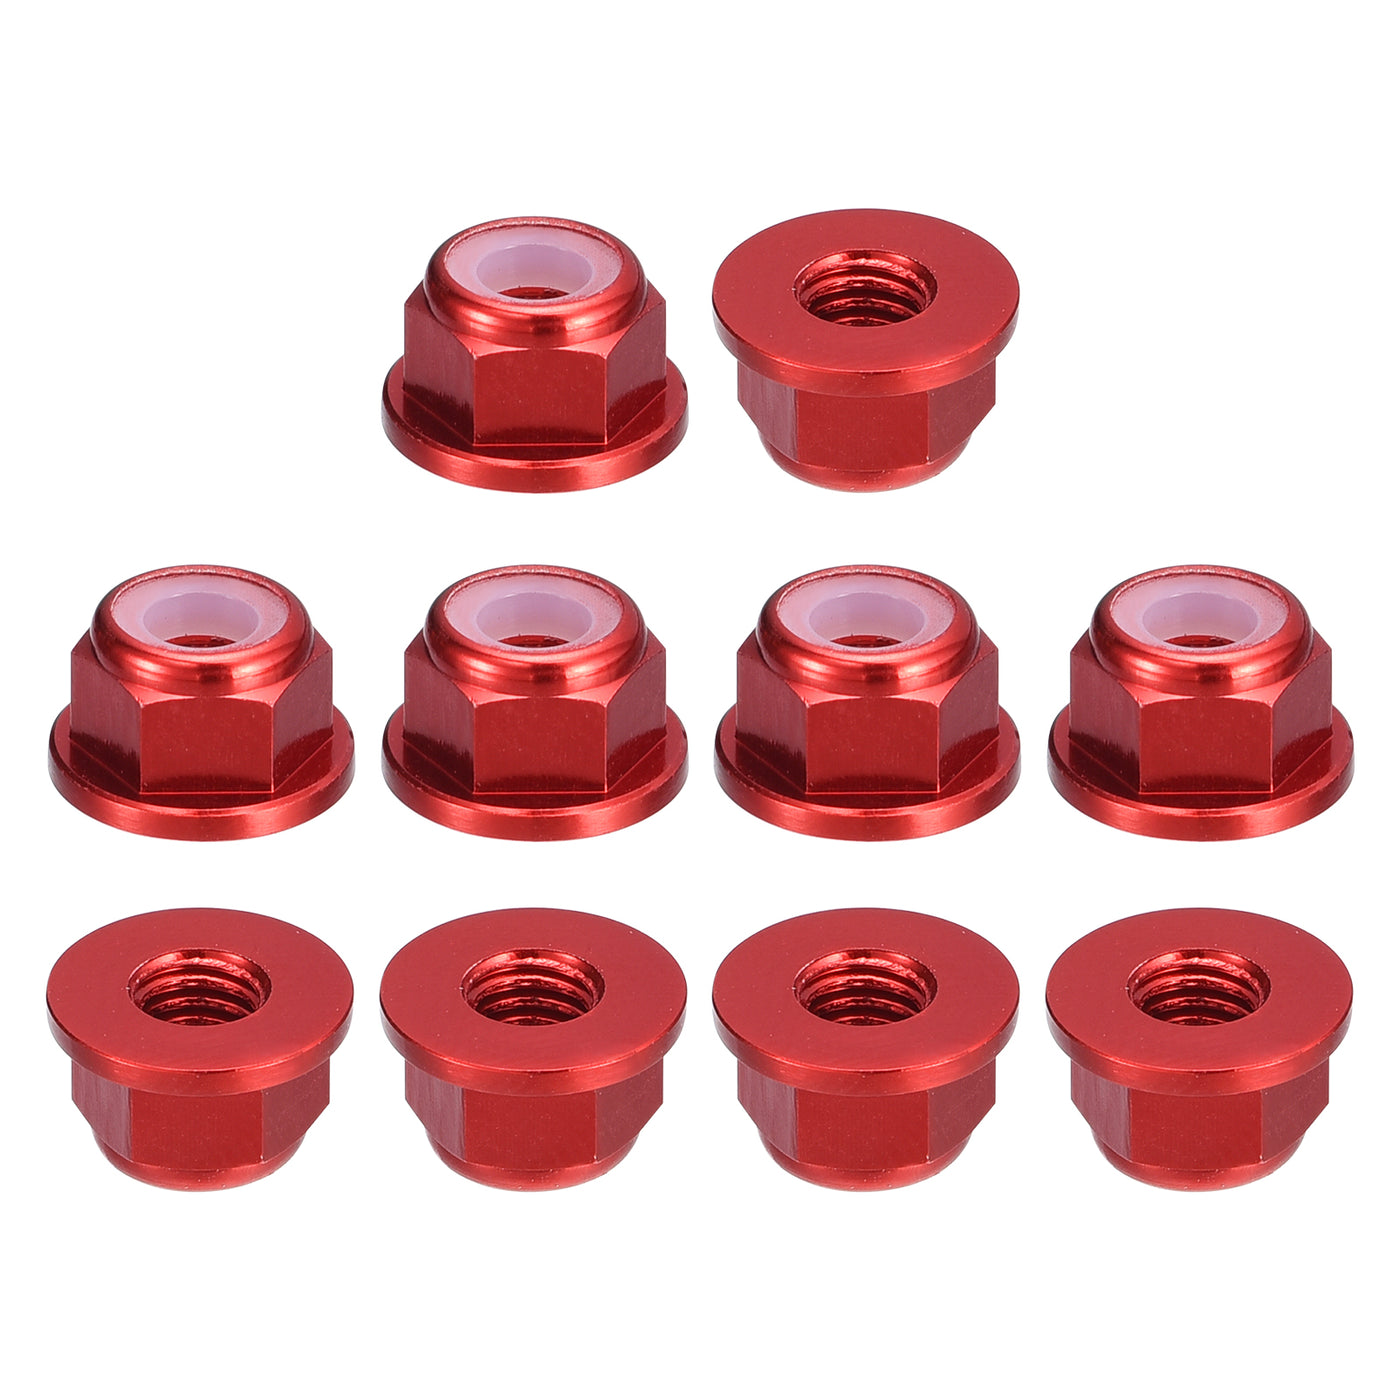 uxcell Uxcell Nylon Insert Hex Lock Nuts, 10pcs - M4 x 0.7mm Aluminum Alloy Self-Locking Nut, Anodizing Flange Lock Nut for Fasteners (Claret)